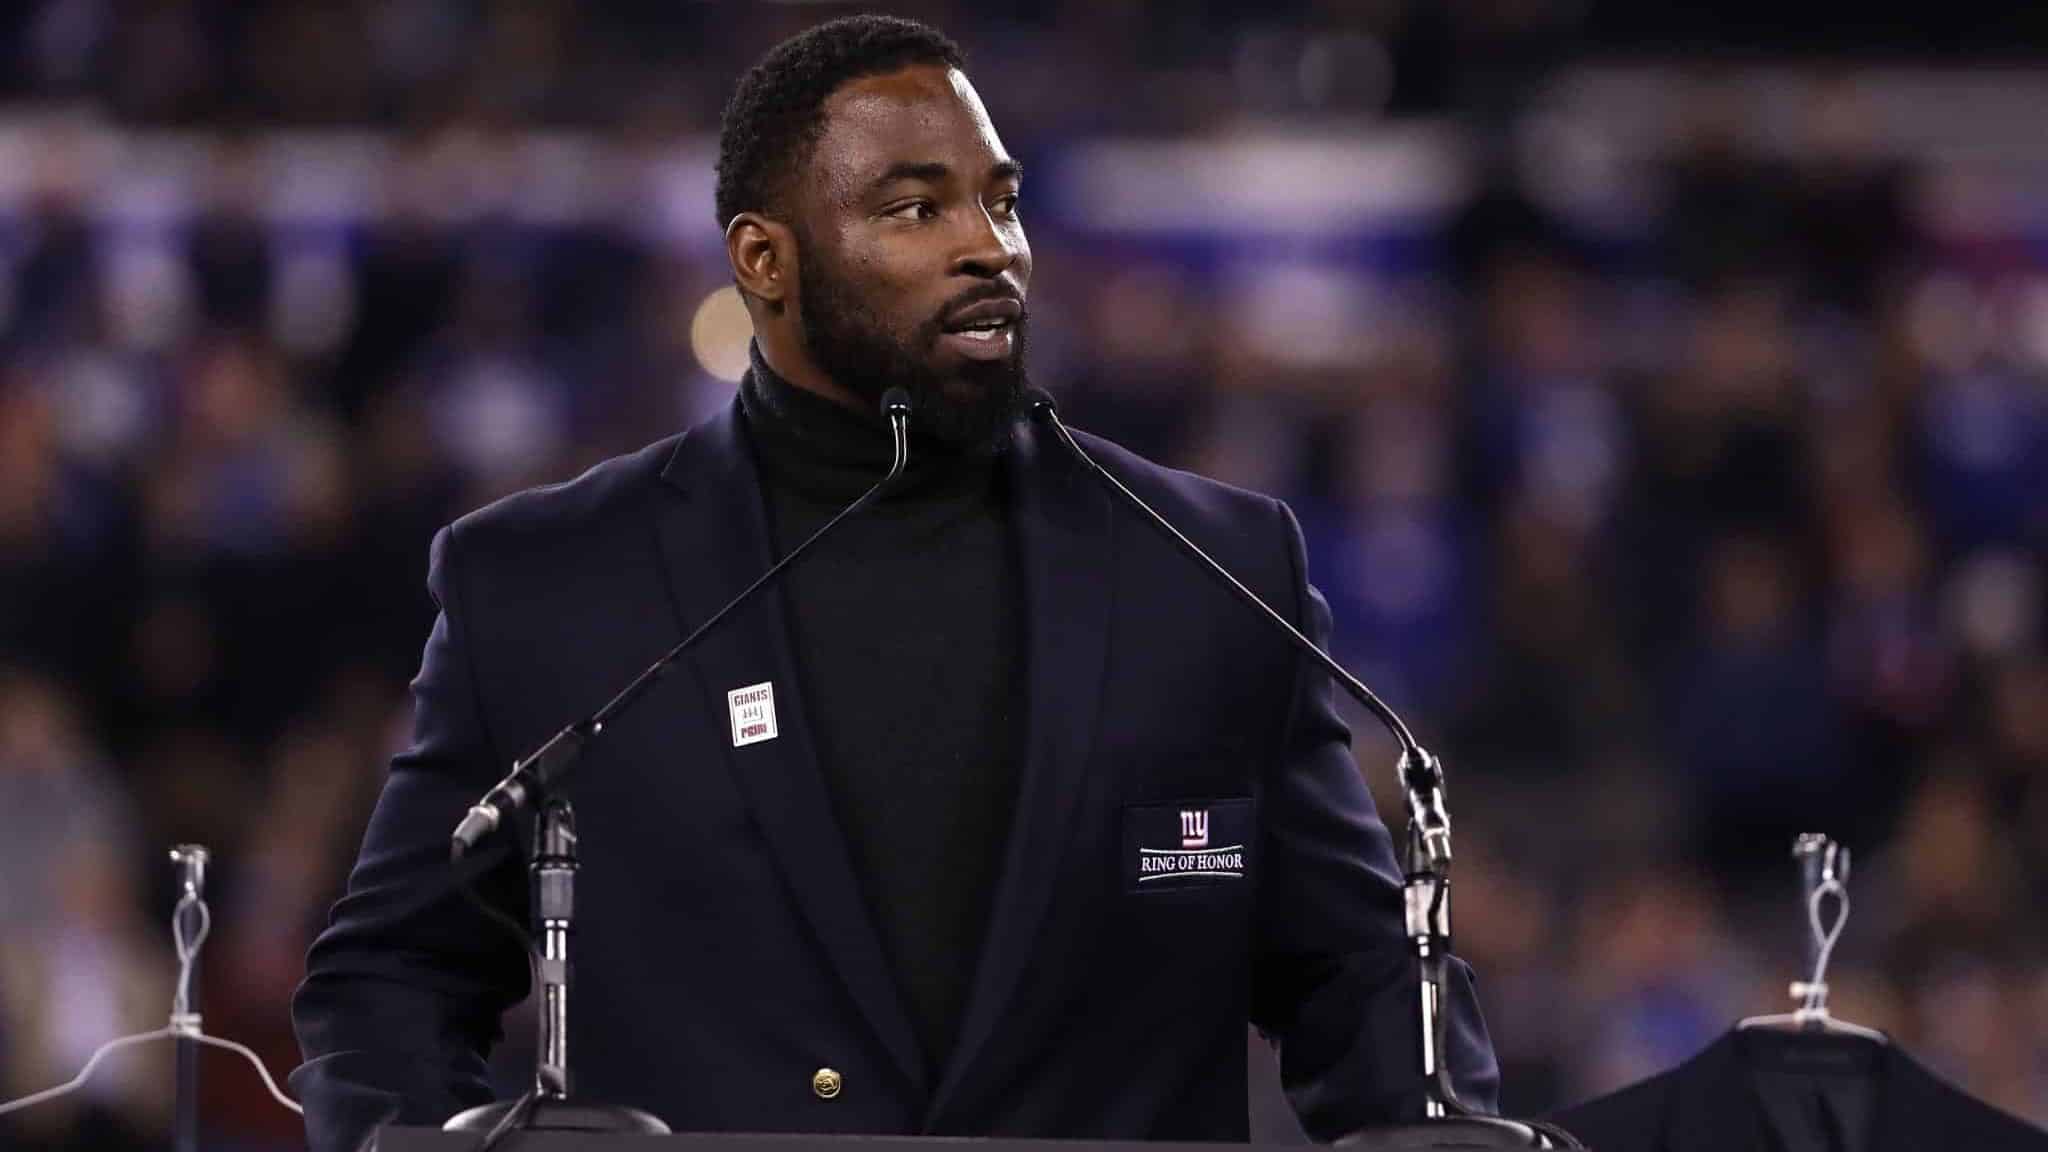 EAST RUTHERFORD, NJ - NOVEMBER 14: 2016 Giants Ring of Honor Inductee Justin Tuck speaks during the halftime ceremony of the game between the Cincinnati Bengals and the New York Giants at MetLife Stadium on November 14, 2016 in East Rutherford, New Jersey.